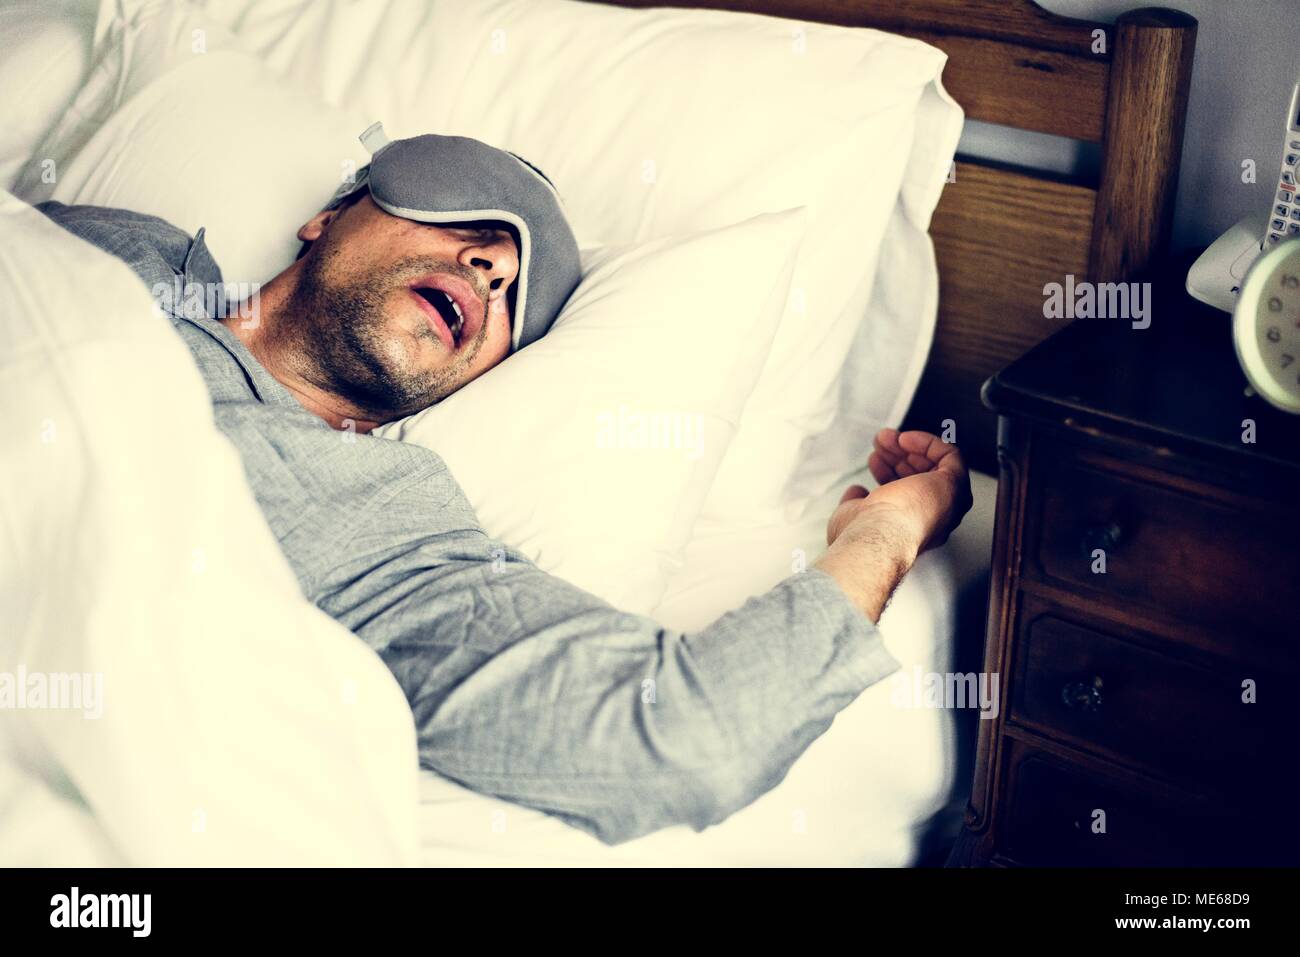 A man sleeping on a bed Stock Photo